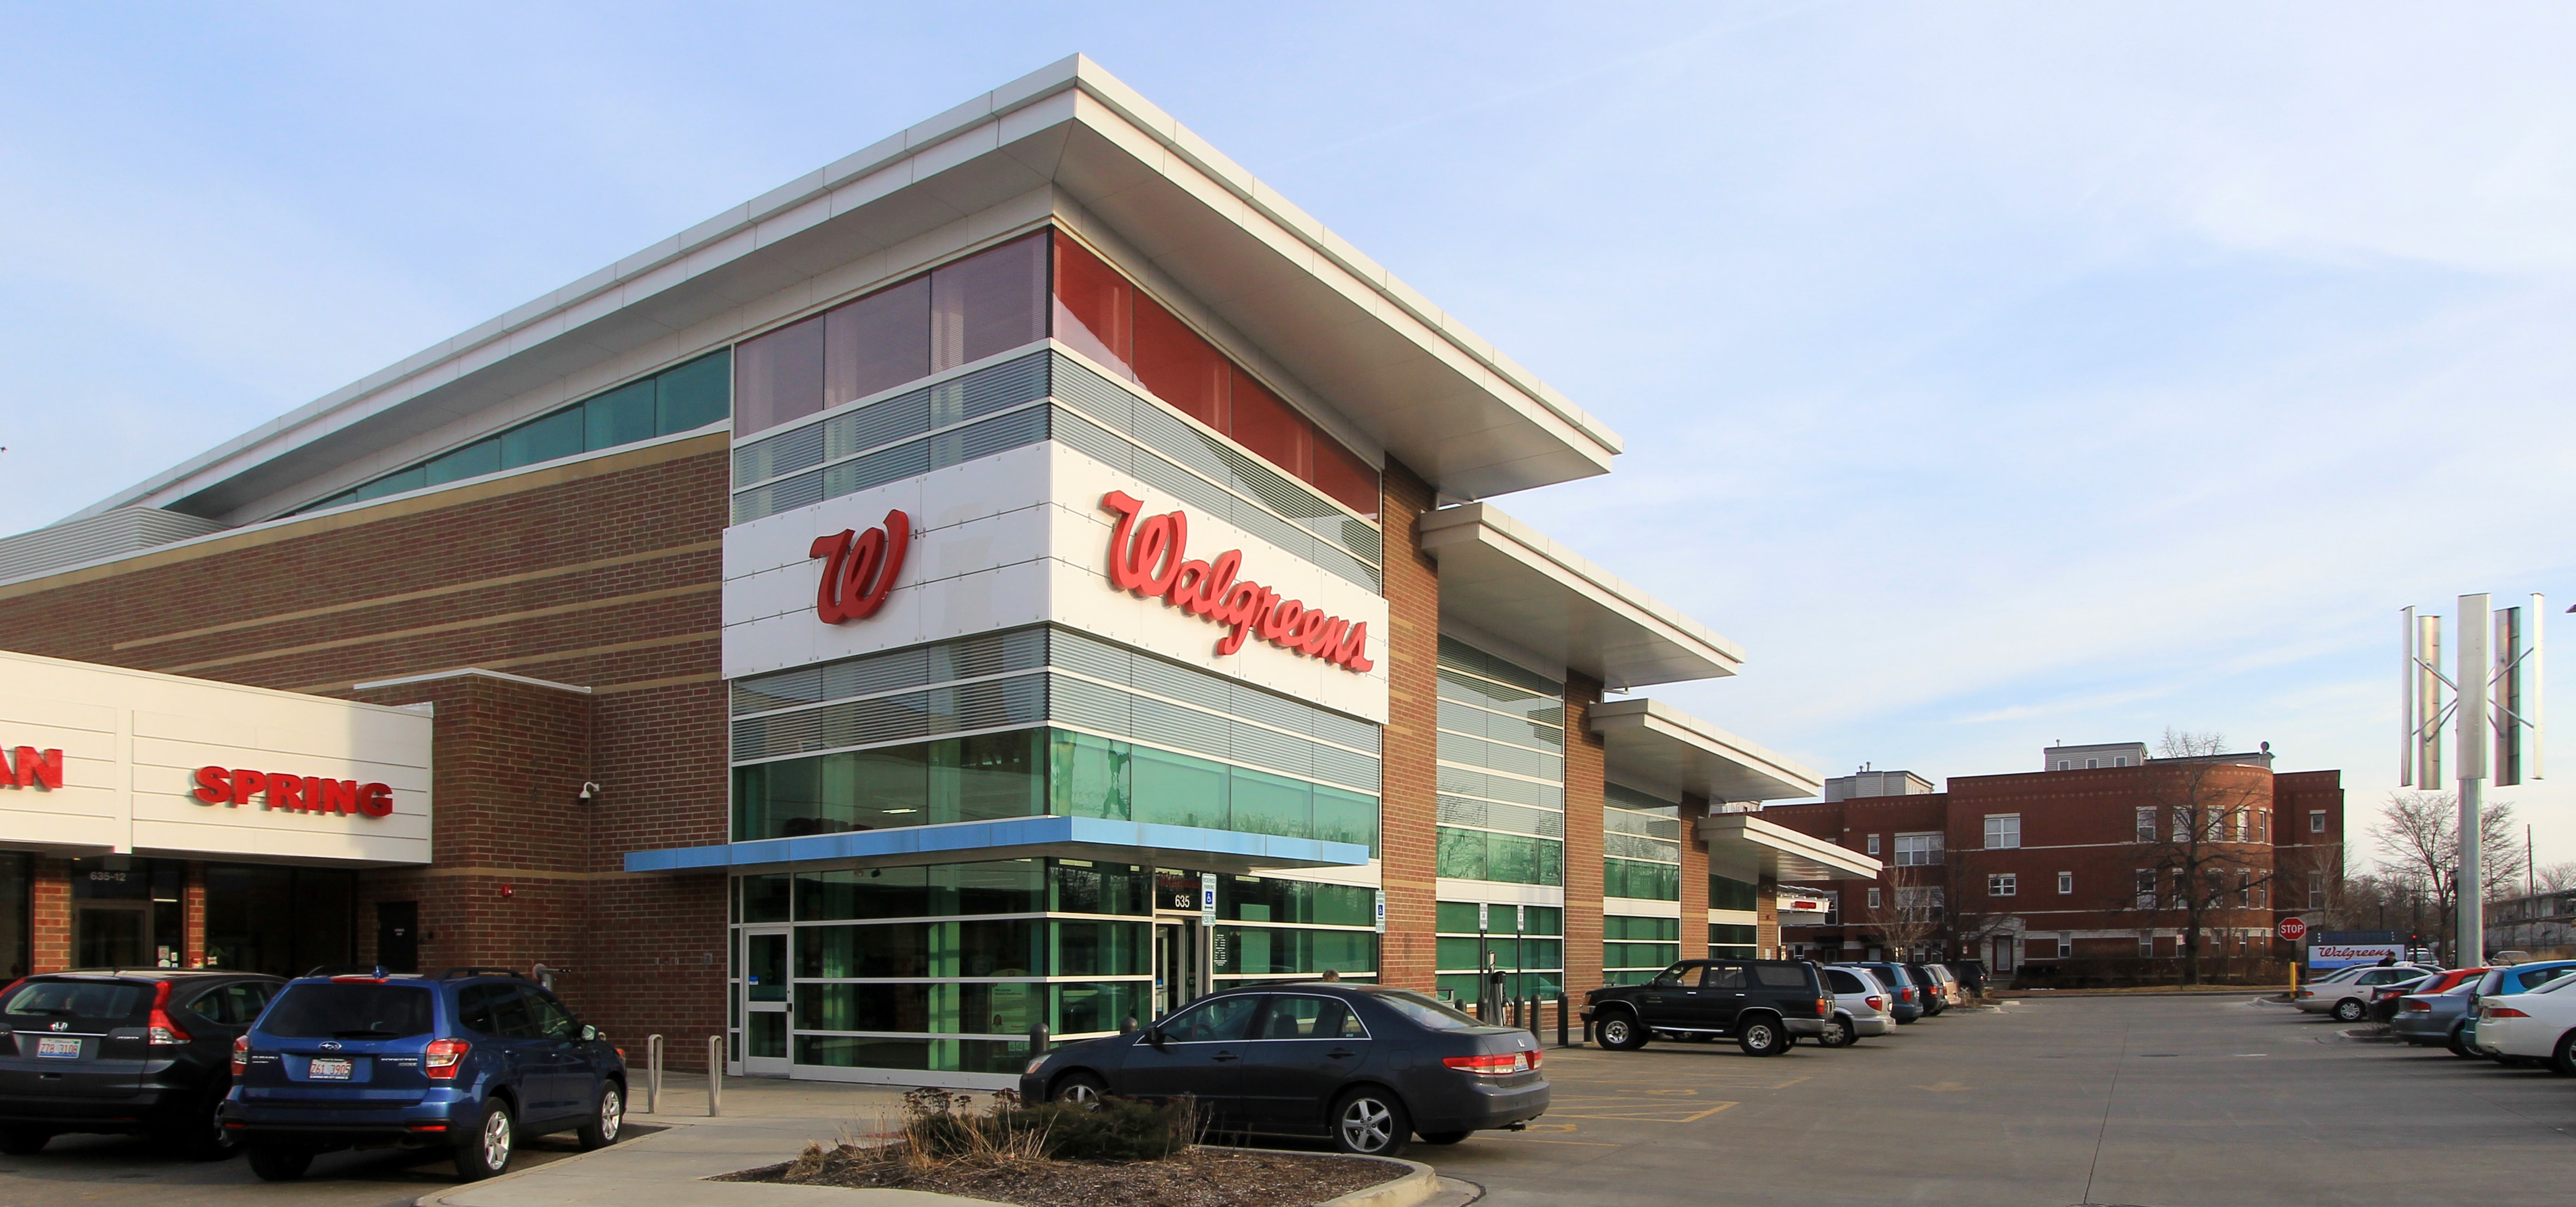 Walgreens Recalls Pain and Itch Cream Over Poisoning Risk - Daily